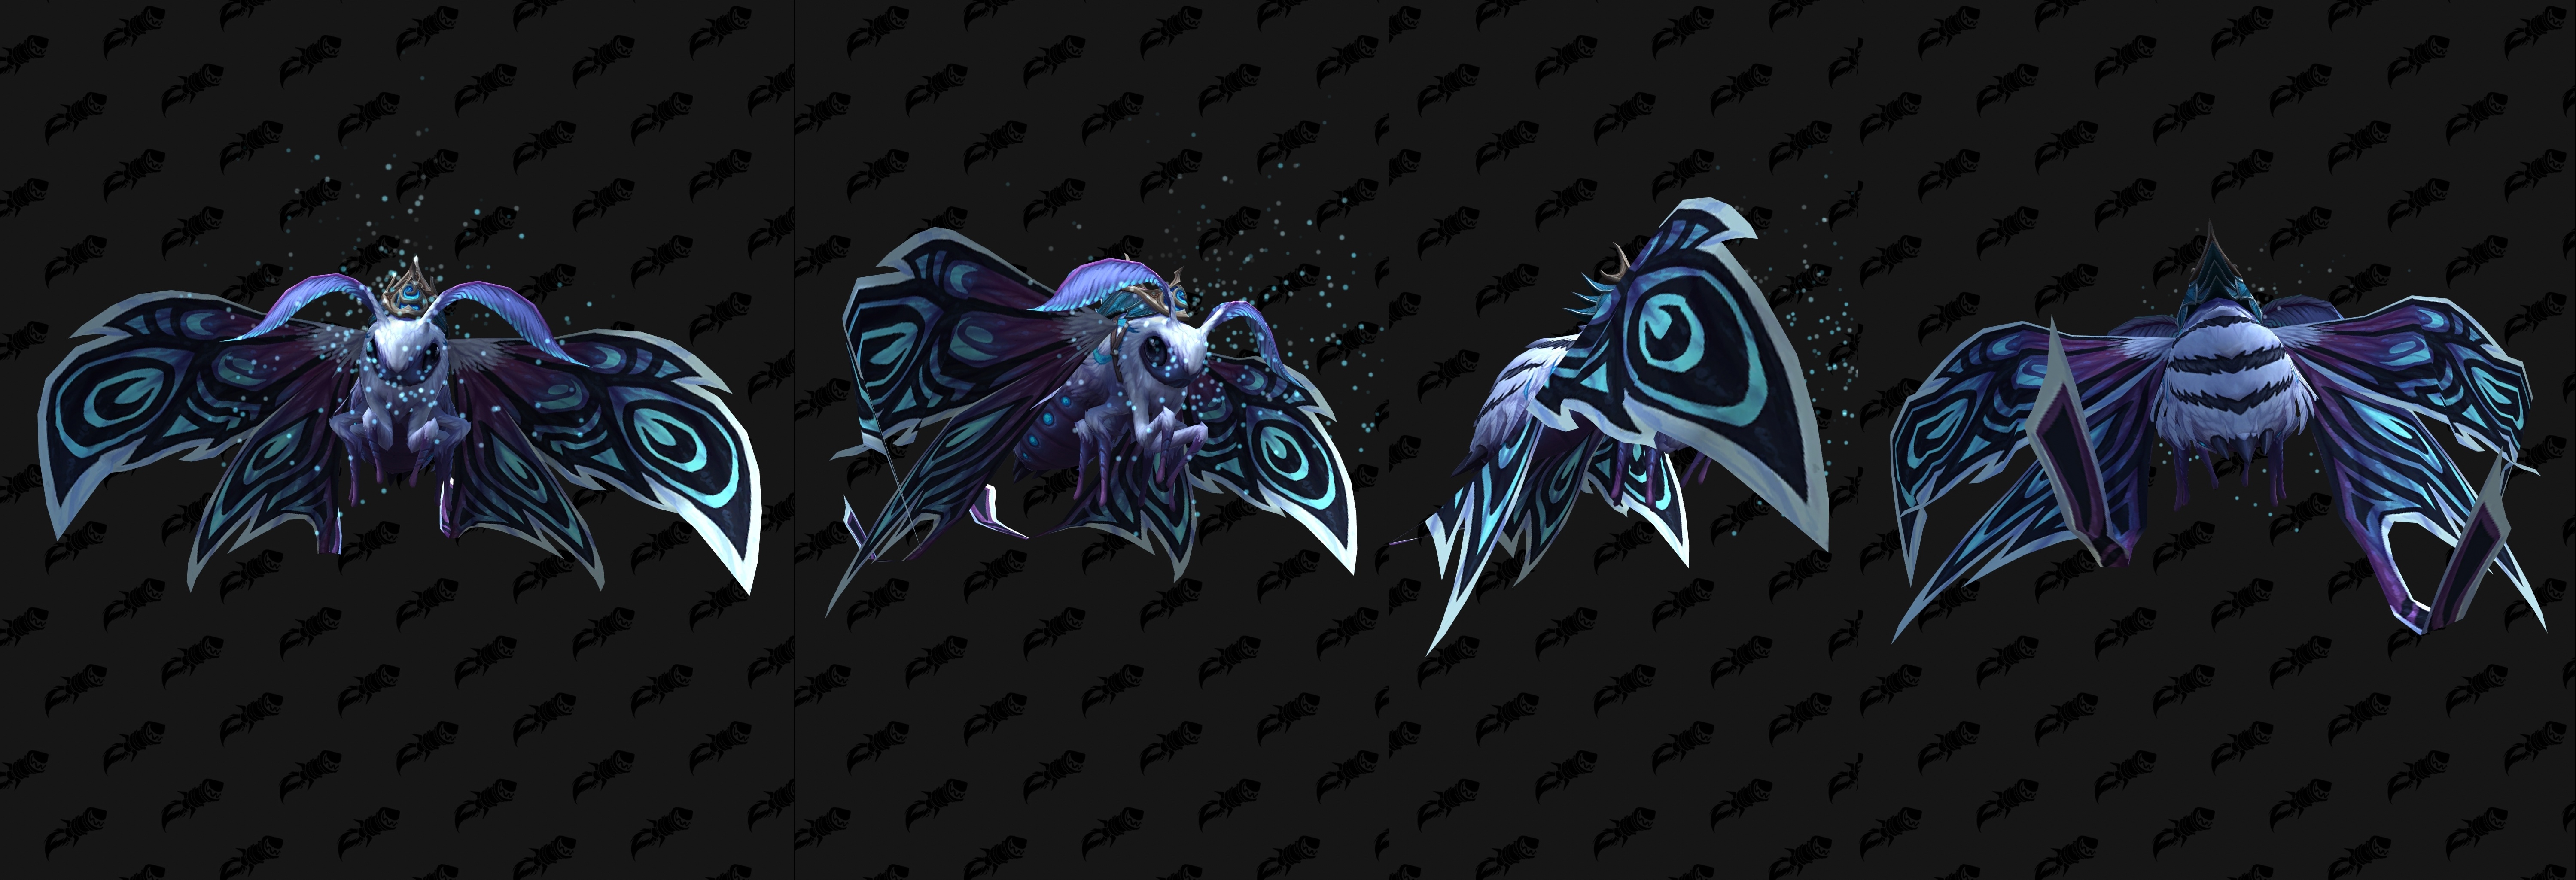 Even More Easy to Obtain Mounts in Shadowlands - Swift Glomhoof, Silky  Shimmermoth, Hulking Deathroc - Wowhead News